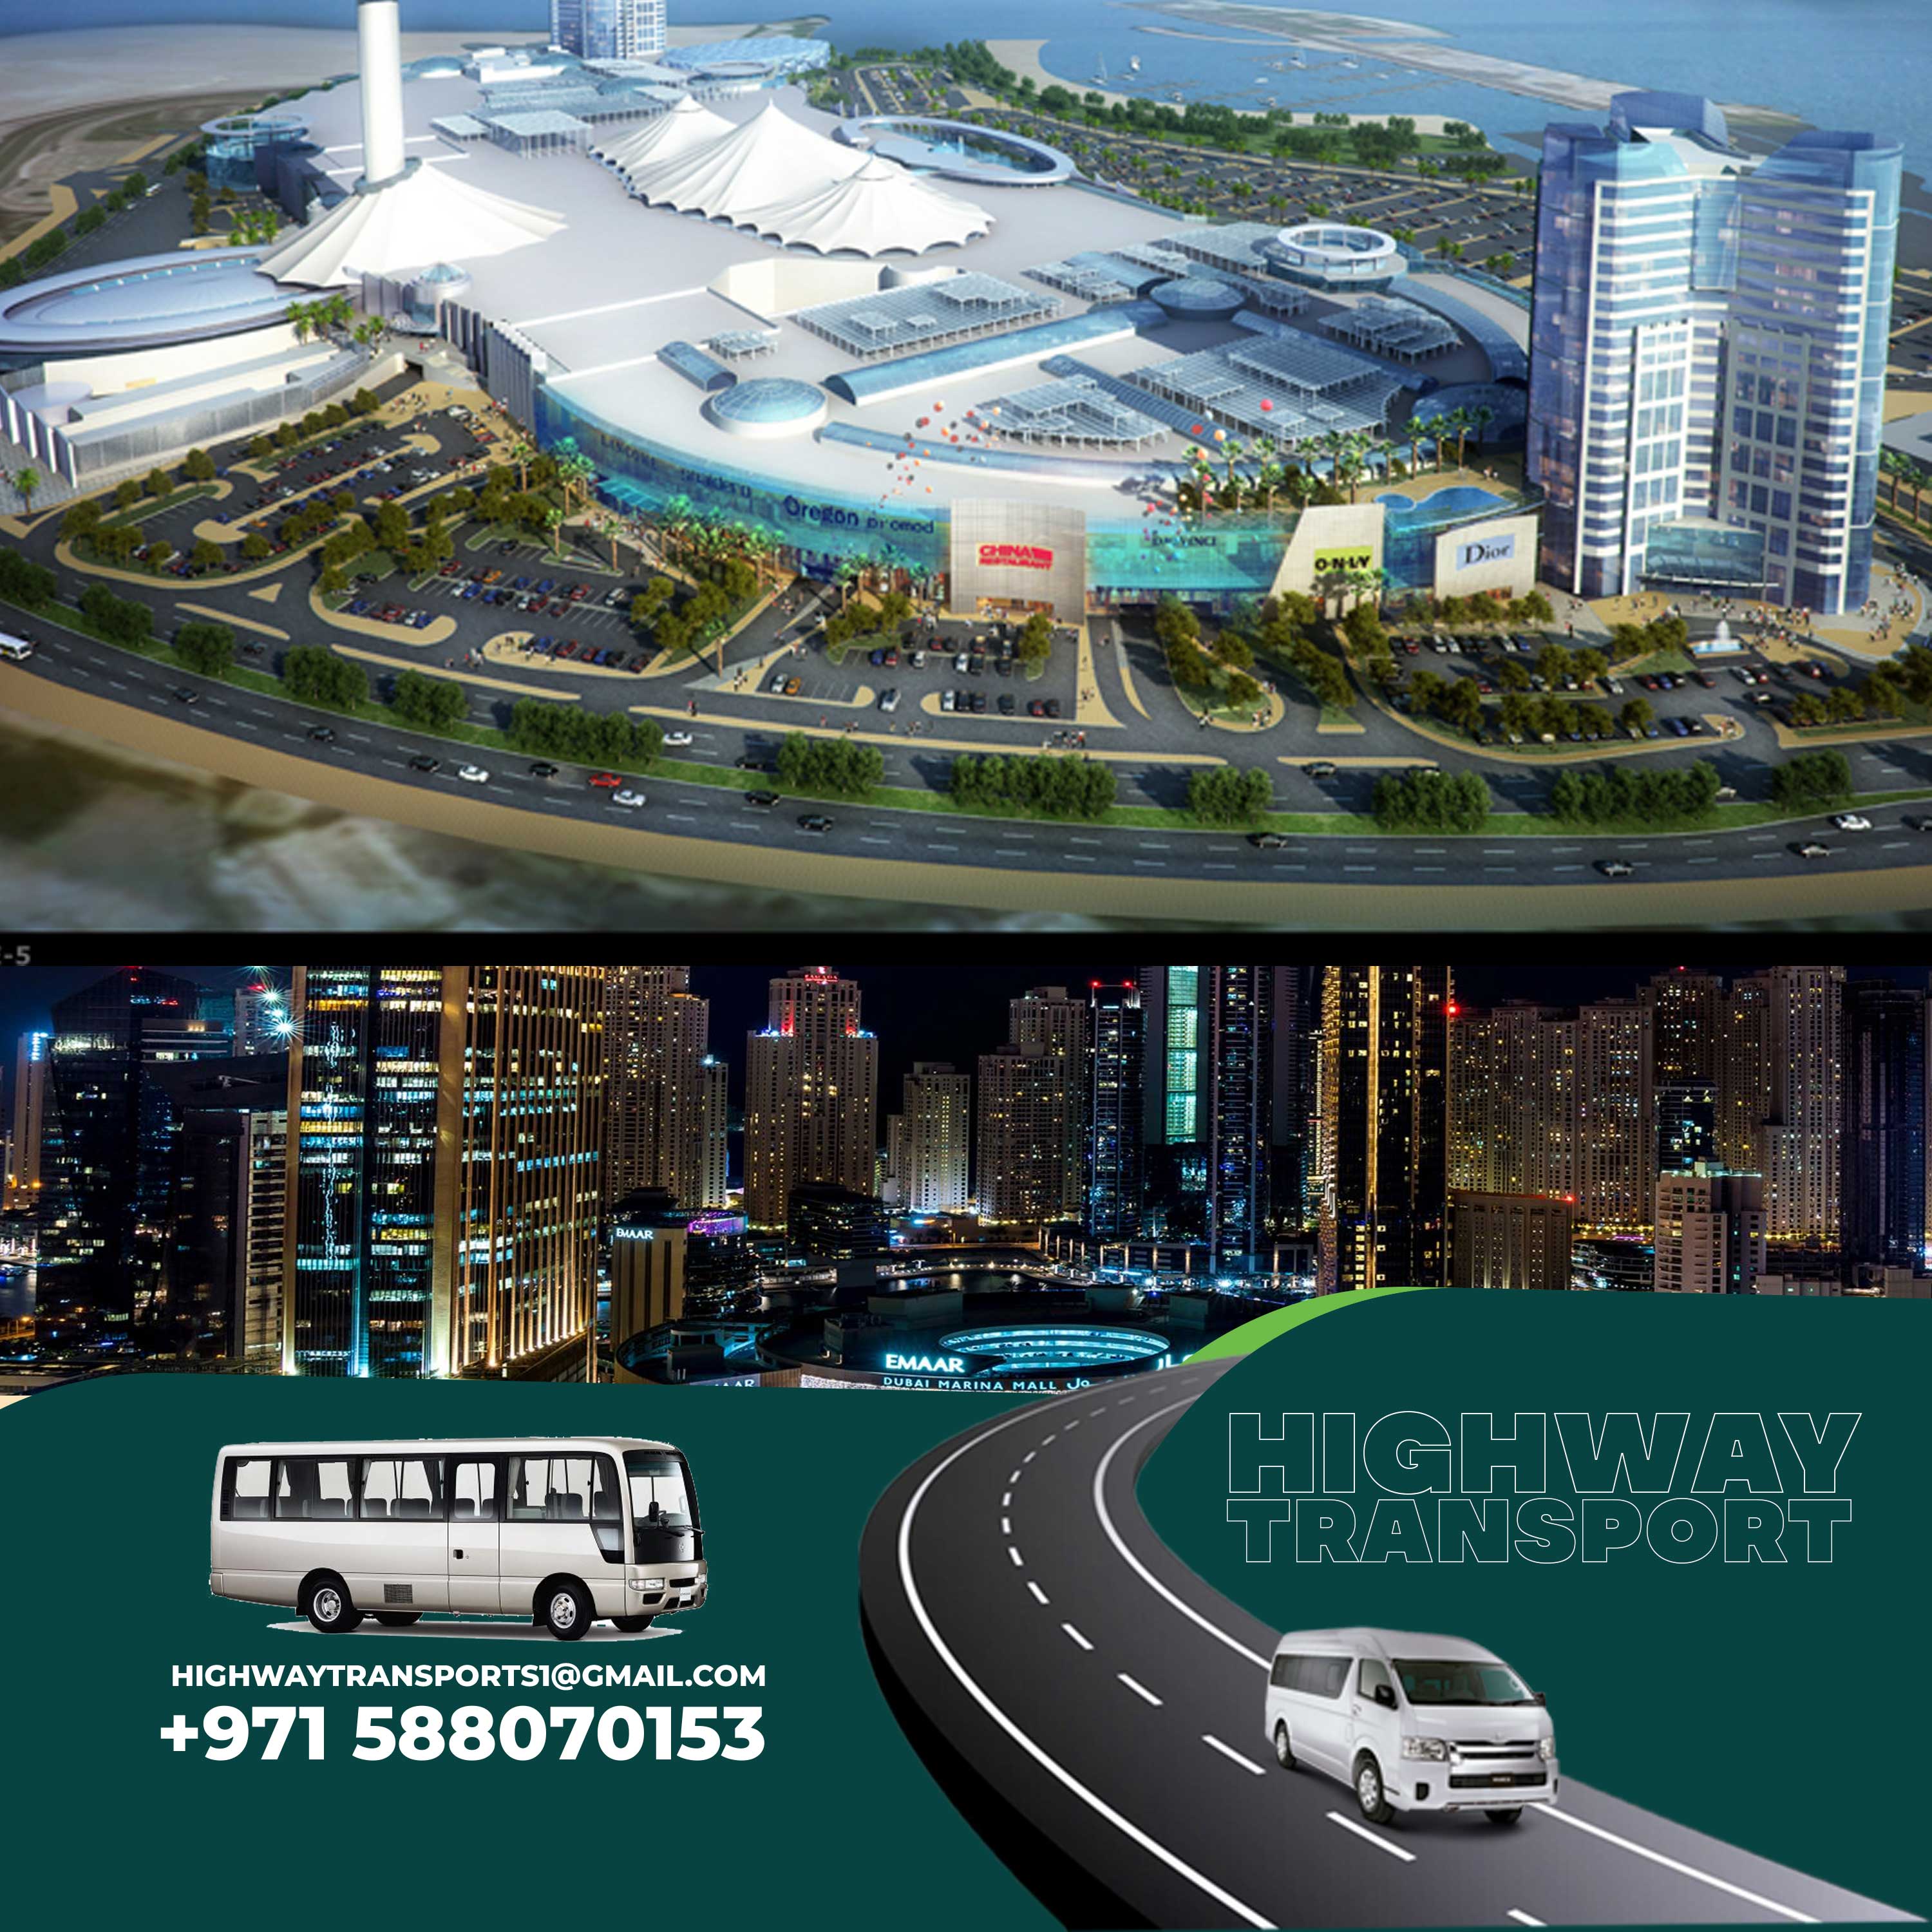 Marina Mall showcasing stores, cinema, and entertainment options with opening hours